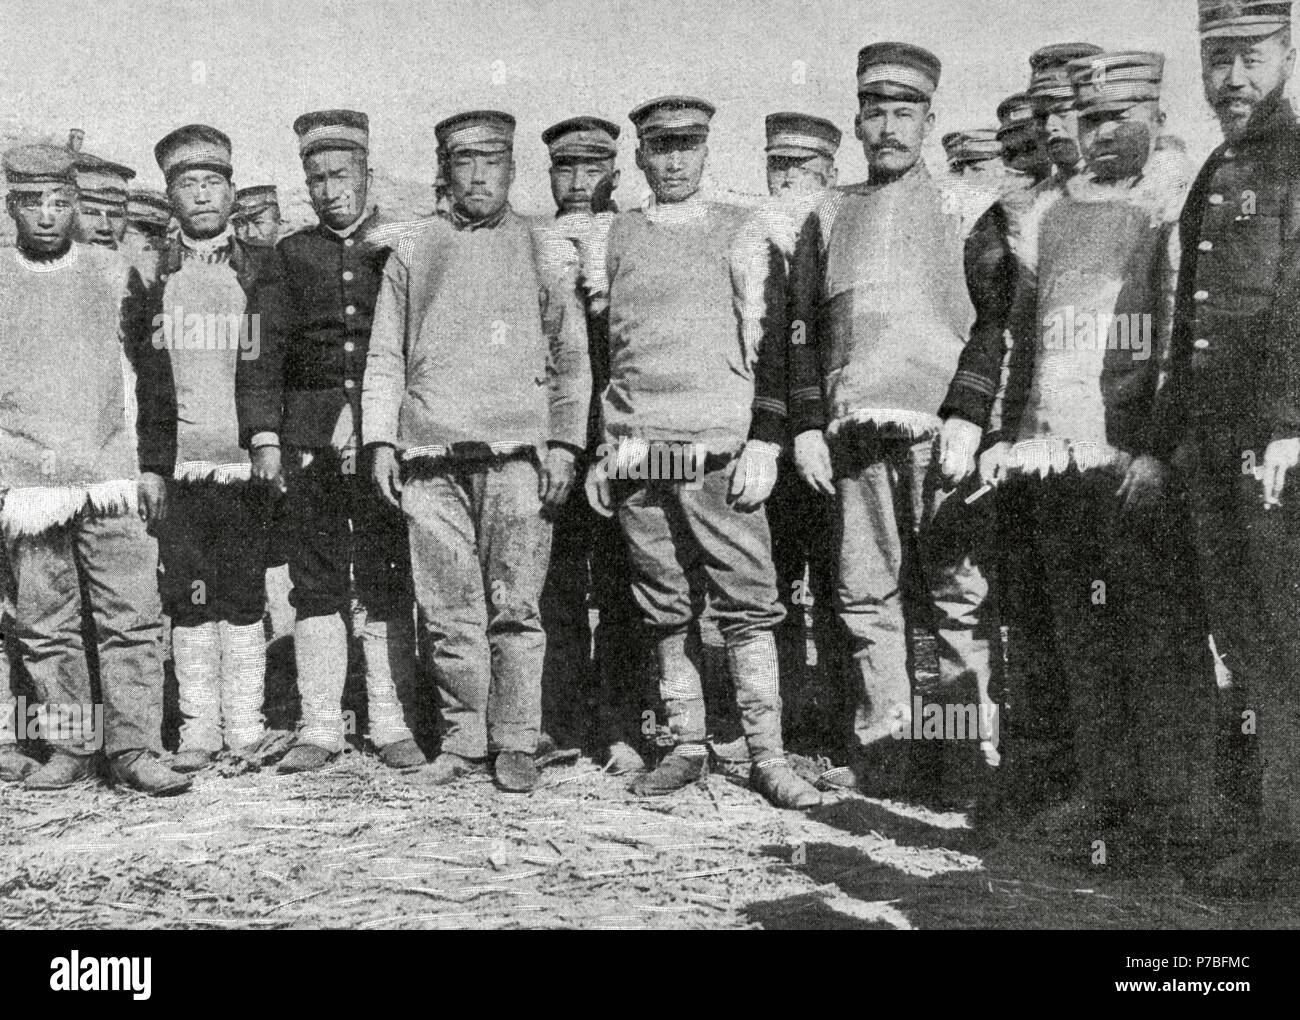 Russo-Japanese War (1904-1905). Japan went to war with Russia in order to ensure the interests in Korea and South Manchuria. Japanese soldiers of the Cha Ho's army with their winter outfits. Photography of the Collier's Weekly. The Artistic Illustration. Stock Photo